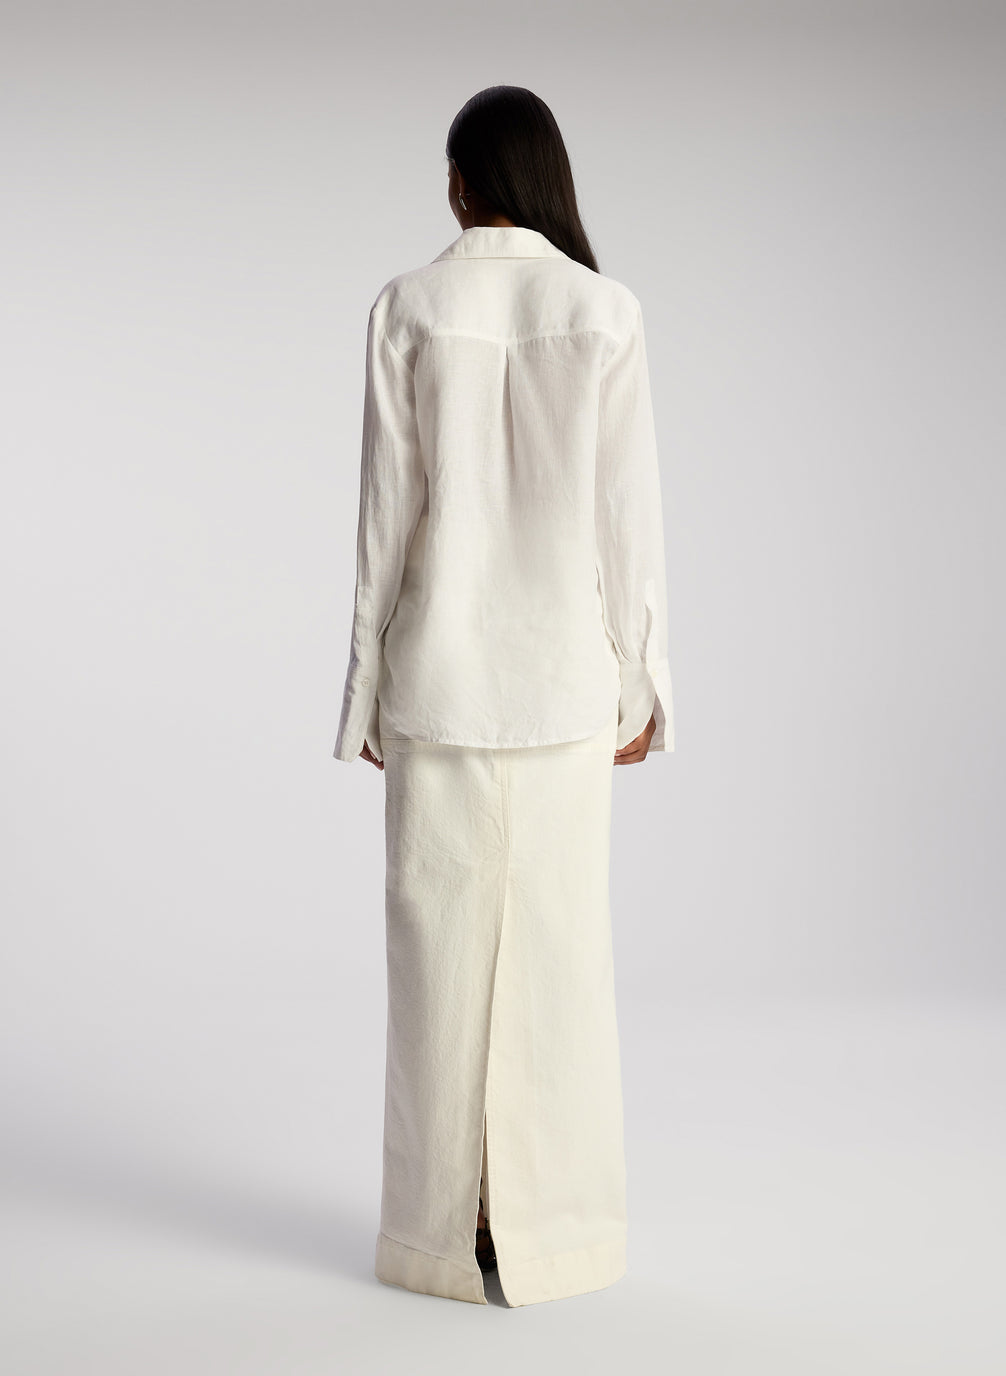 back view woman wearing white button down linen shirt and white maxi skirt